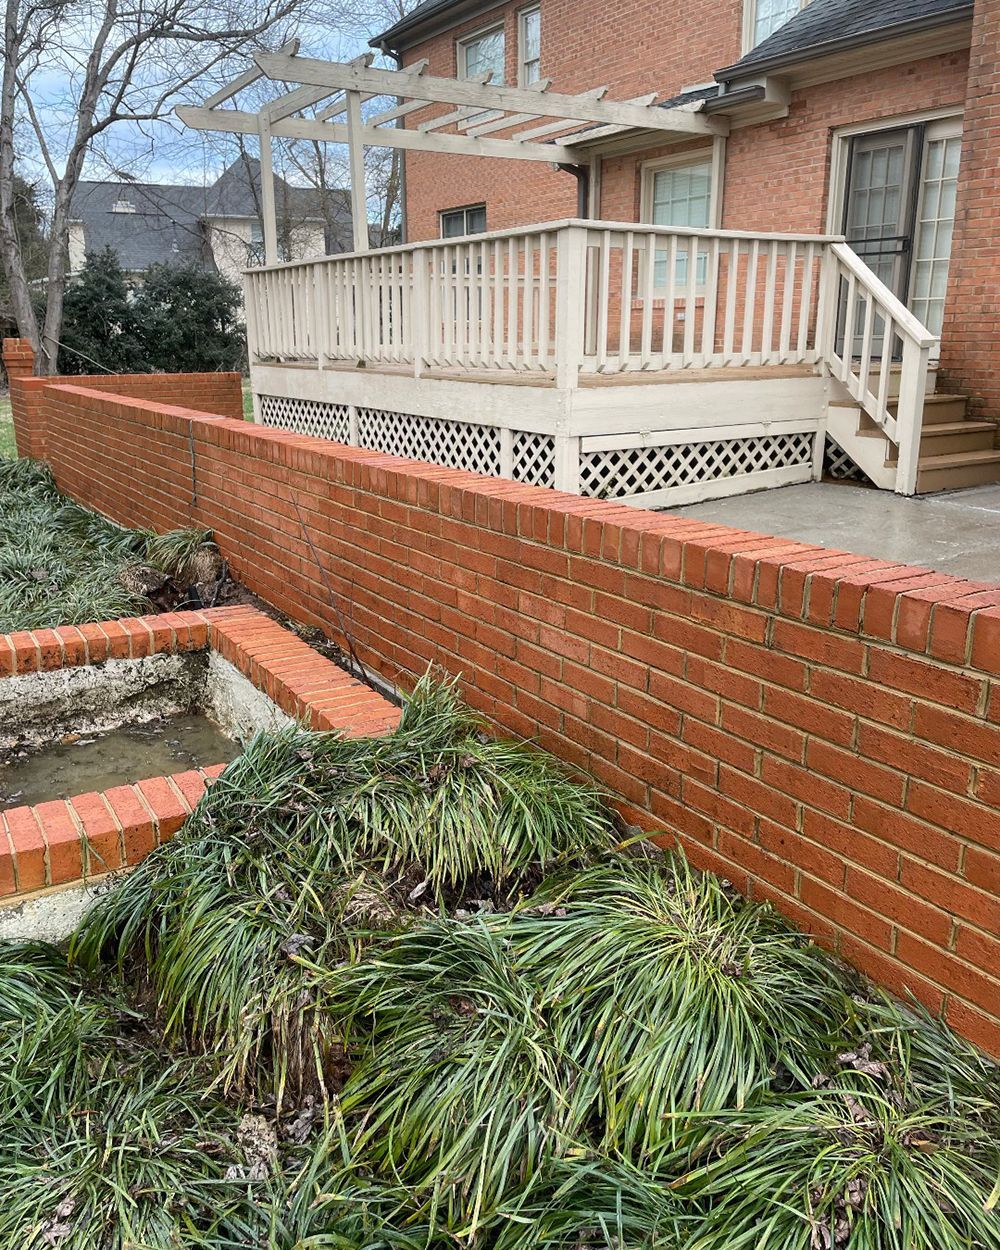 A brick wall leading to a deck with a white railing and stairs